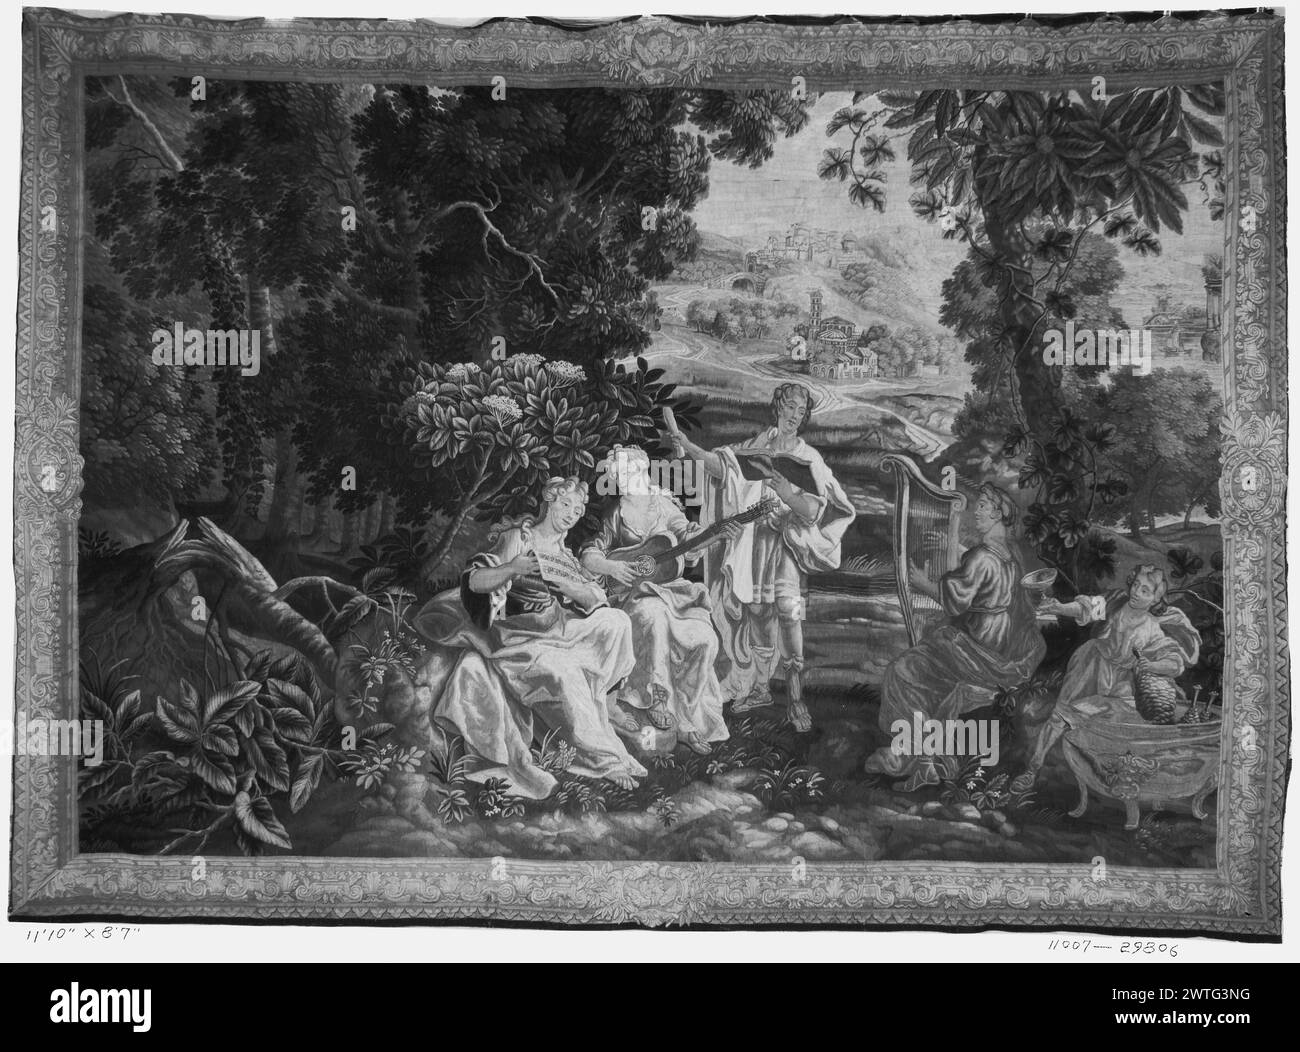 Musicians in landscape. unknown c. 1700 Tapestry Dimensions: H 8'7' x W 11'10' Tapestry Materials/Techniques: unknown Culture: Flemish Weaving Center: Lille Ownership History: French & Co. purchased from Mrs. John R. Livermore, invoiced 2/19/1927. In forest, group of musicians, including 2 women playing guitar & harp while man & woman hold music (singers?); small child stands near vat with jugs of wine (?) while holding chalice (BRD) abstracted foliage interspersed with architectural moldings, portrait medallions set in central cartouches on every side Stock sheet states that tapestry was sent Stock Photo